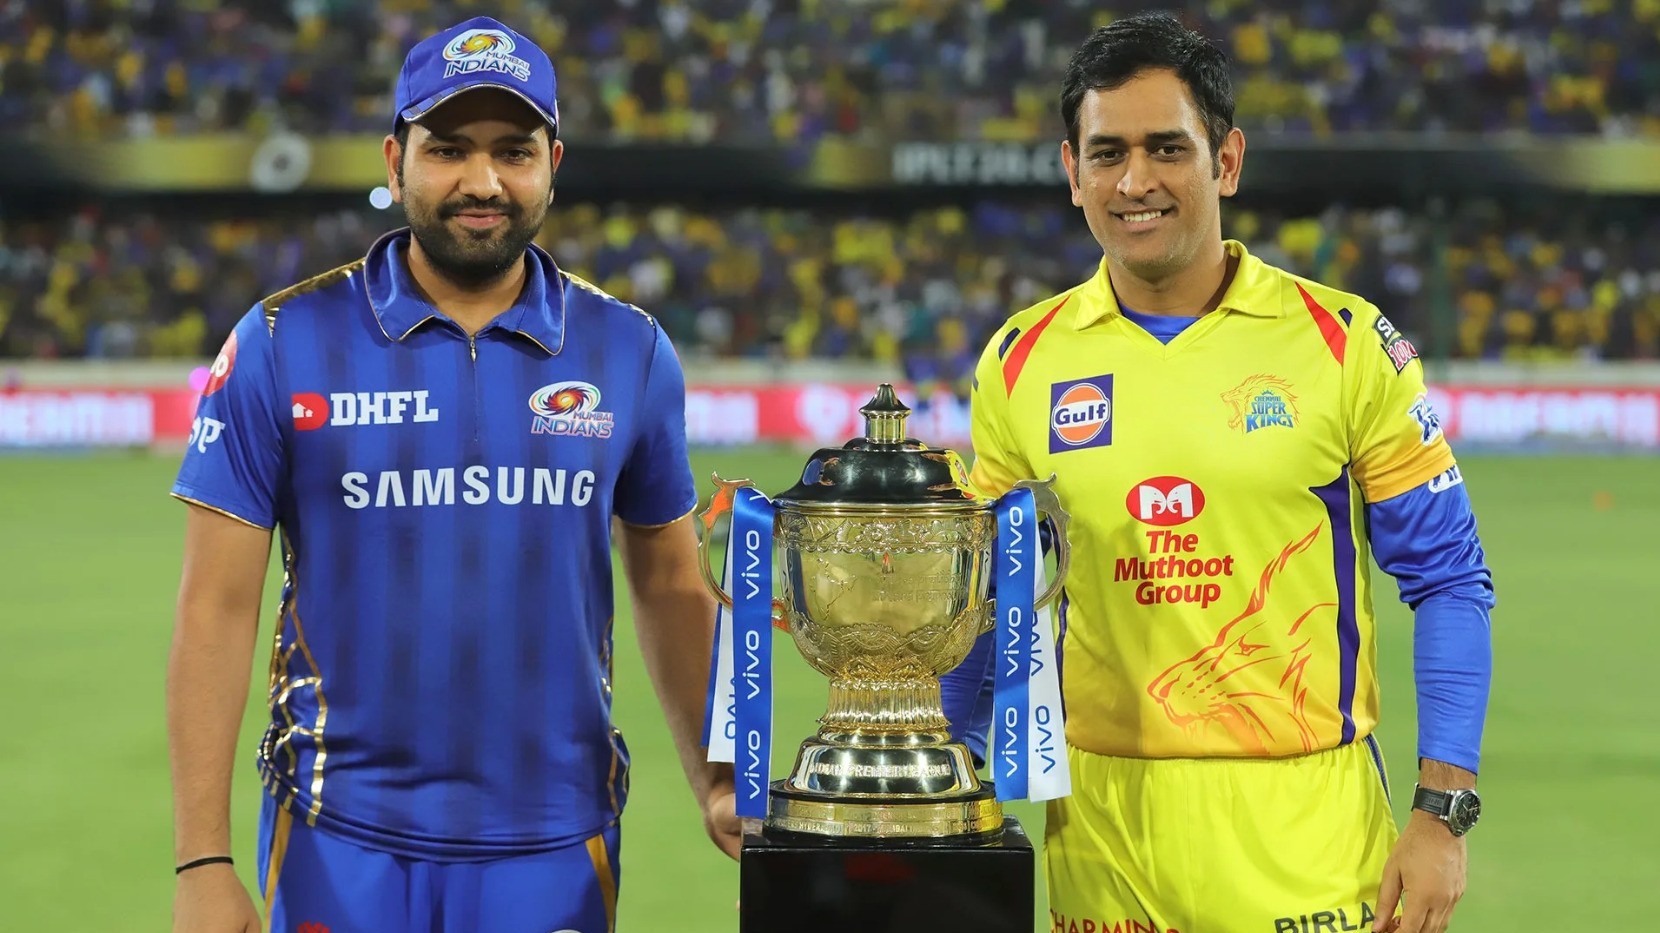 IPL 2020: Tournament set to be postponed indefinitely as India bracing for COVID-19 lockdown extension